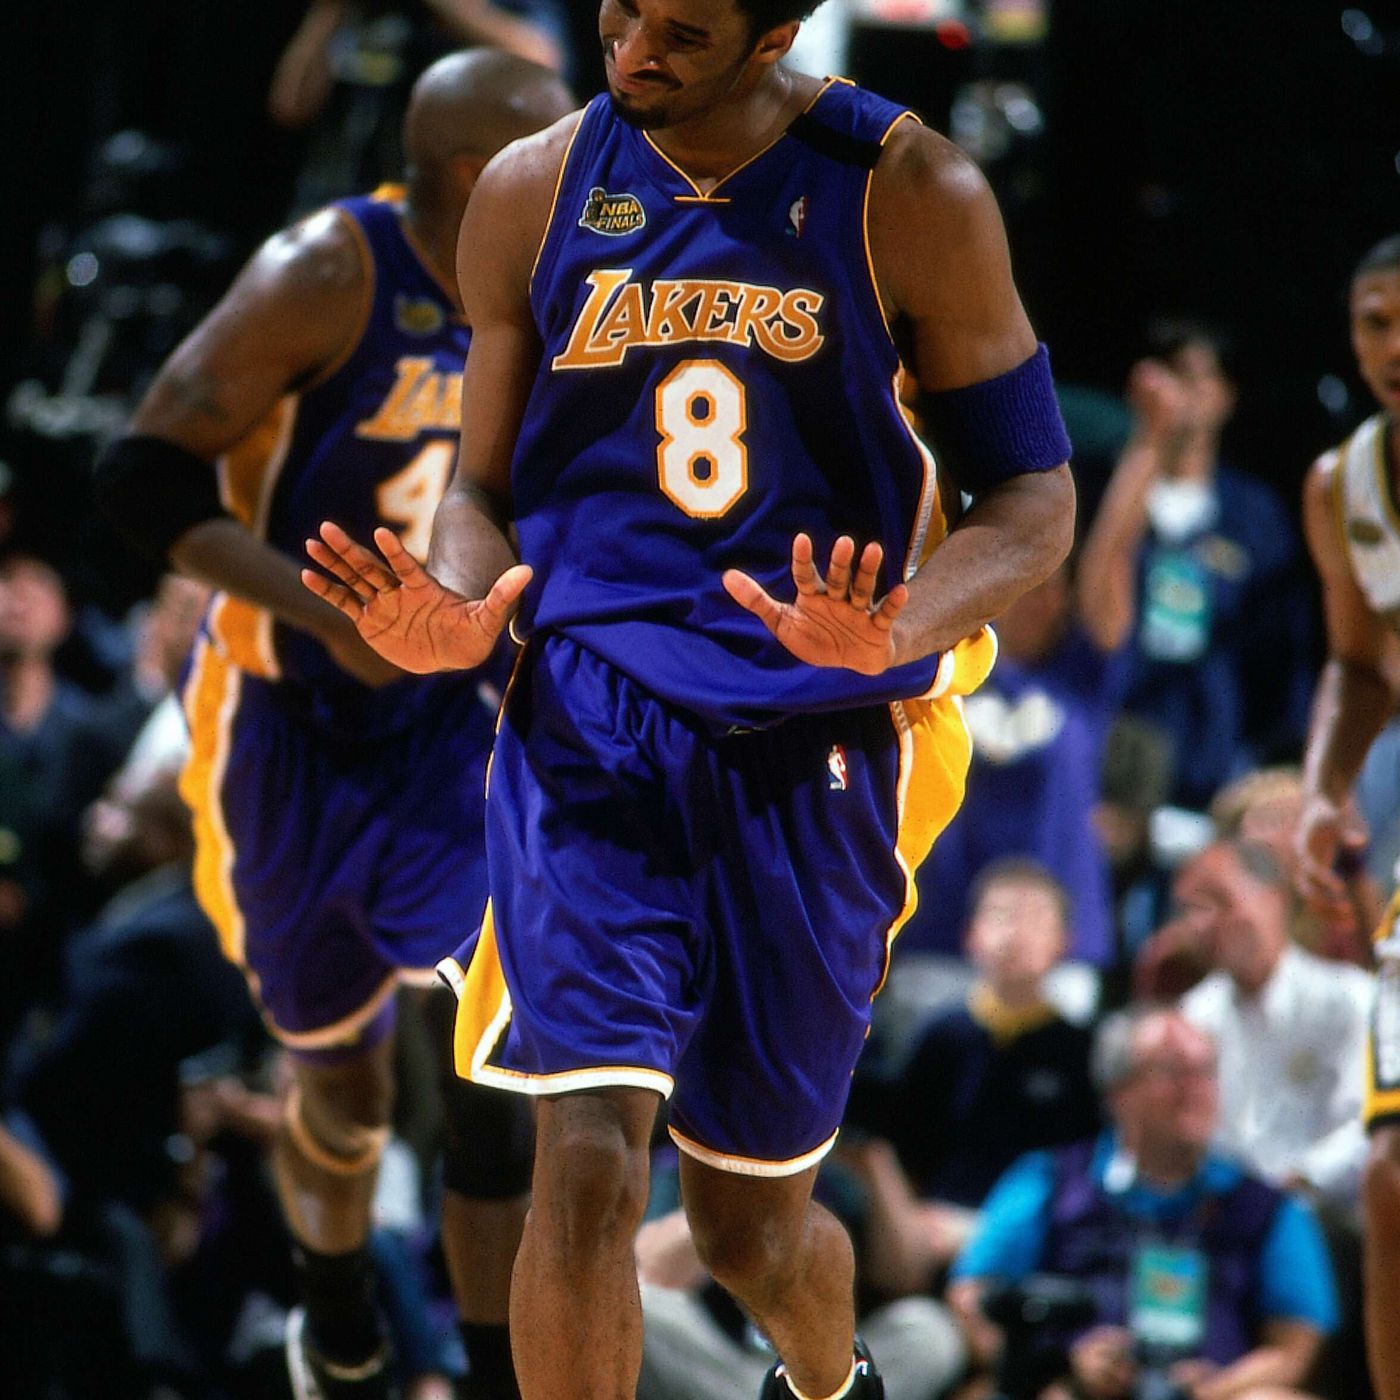 Lakers History: Kobe's Overtime Heroics in the 2000 Finals